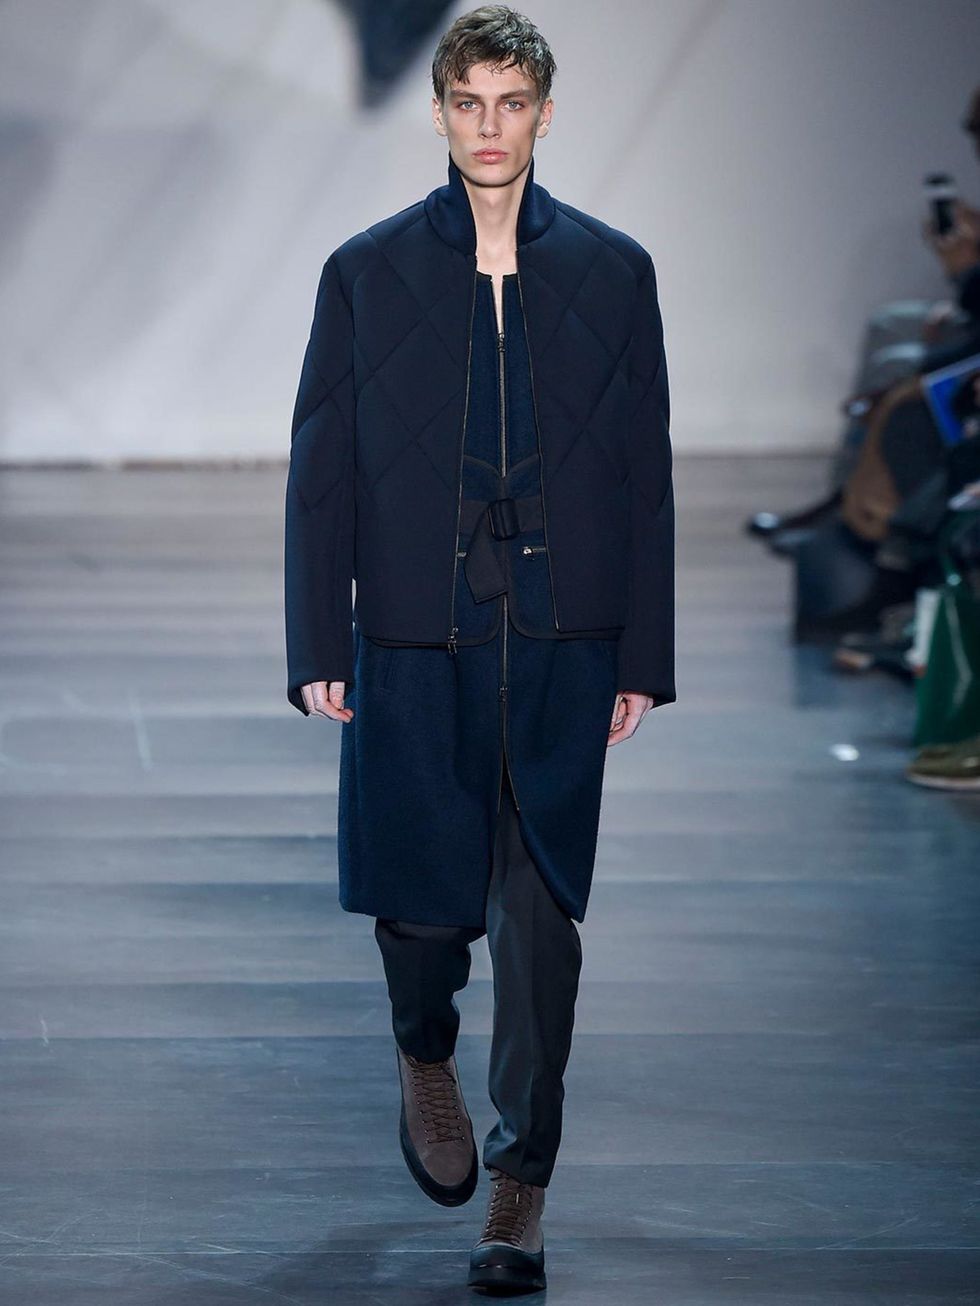 <p>3.1 Phillip Lim</p>

<p>Blending multiple textures and layering lengths always keeps things interesting.</p>